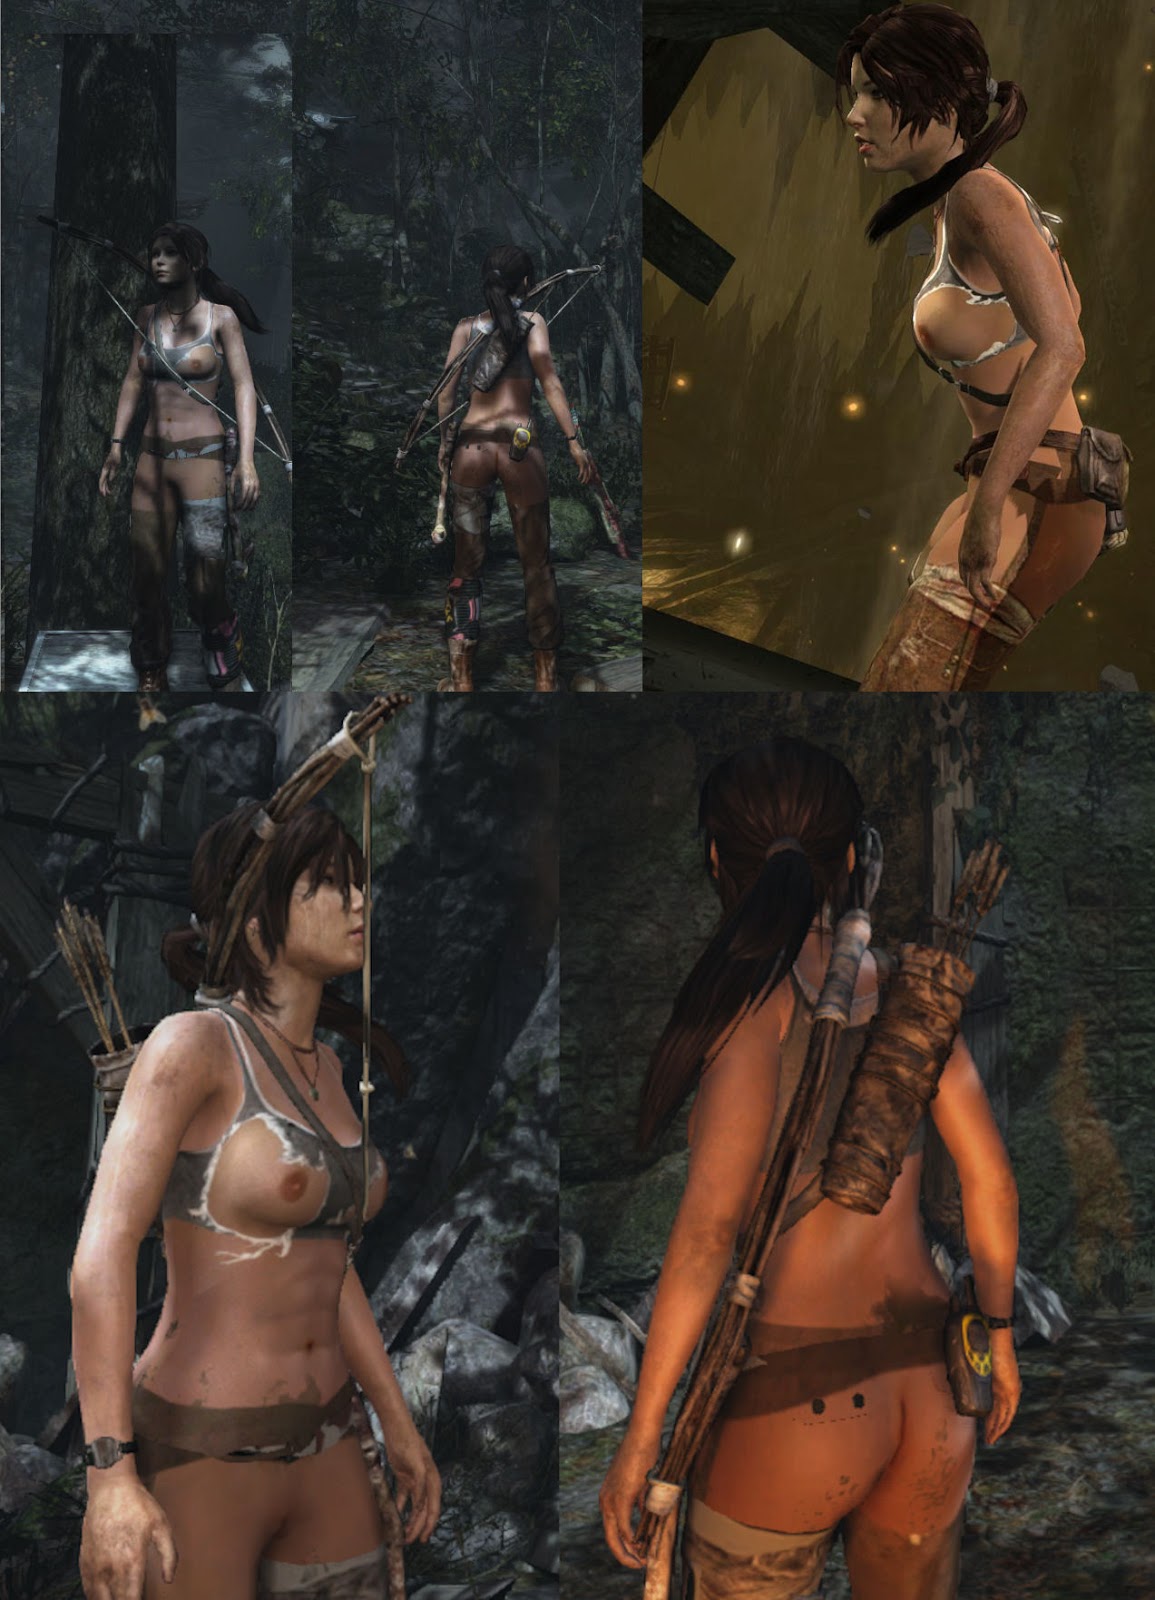 Exploring lara crofts sensuality in rise of the tomb raider nude mod